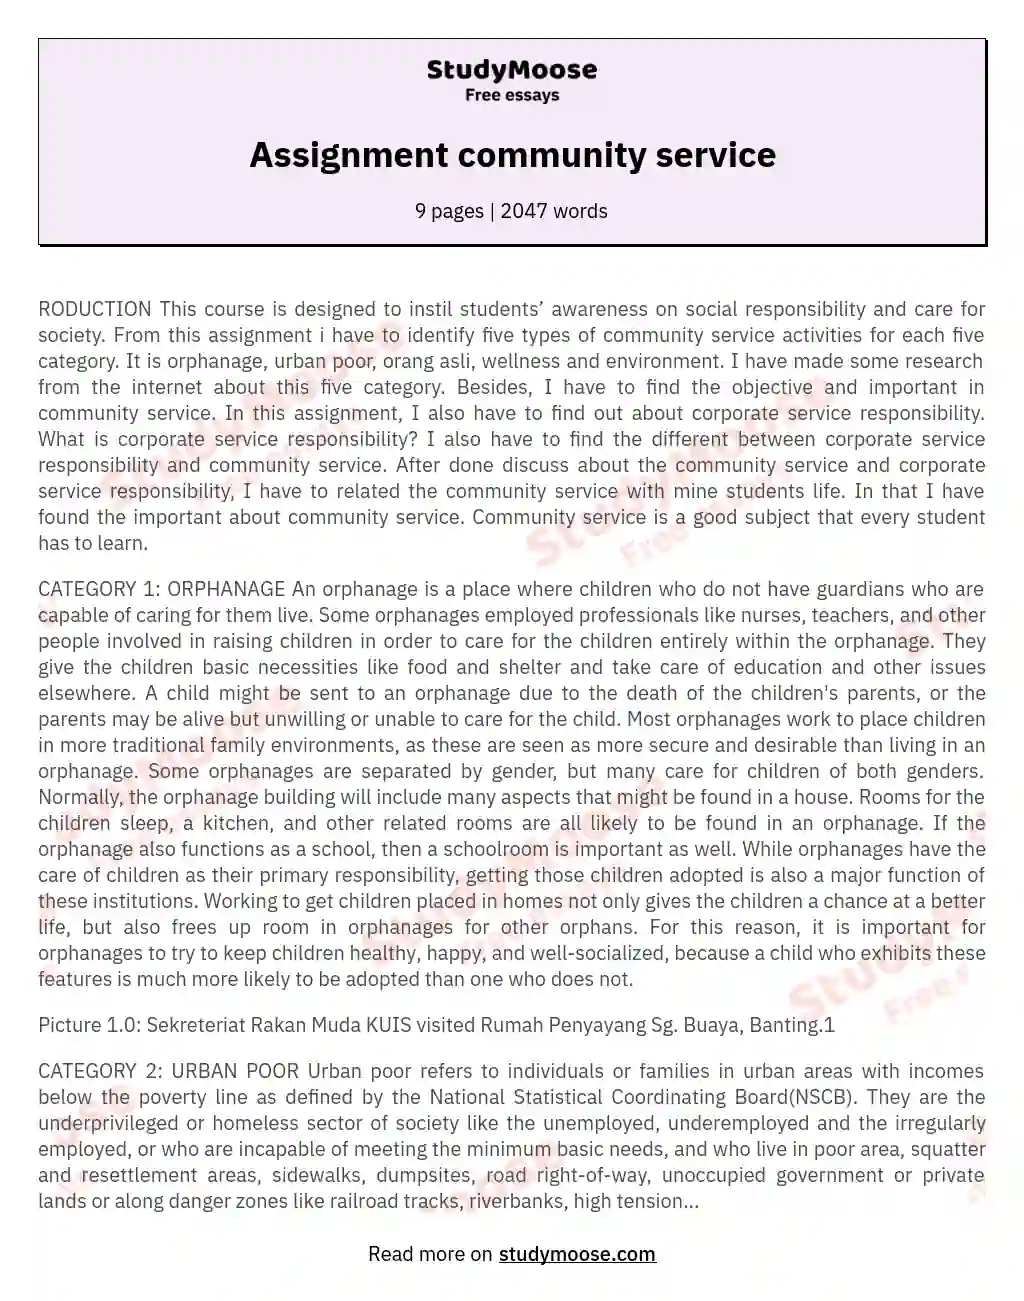 Assignment community service